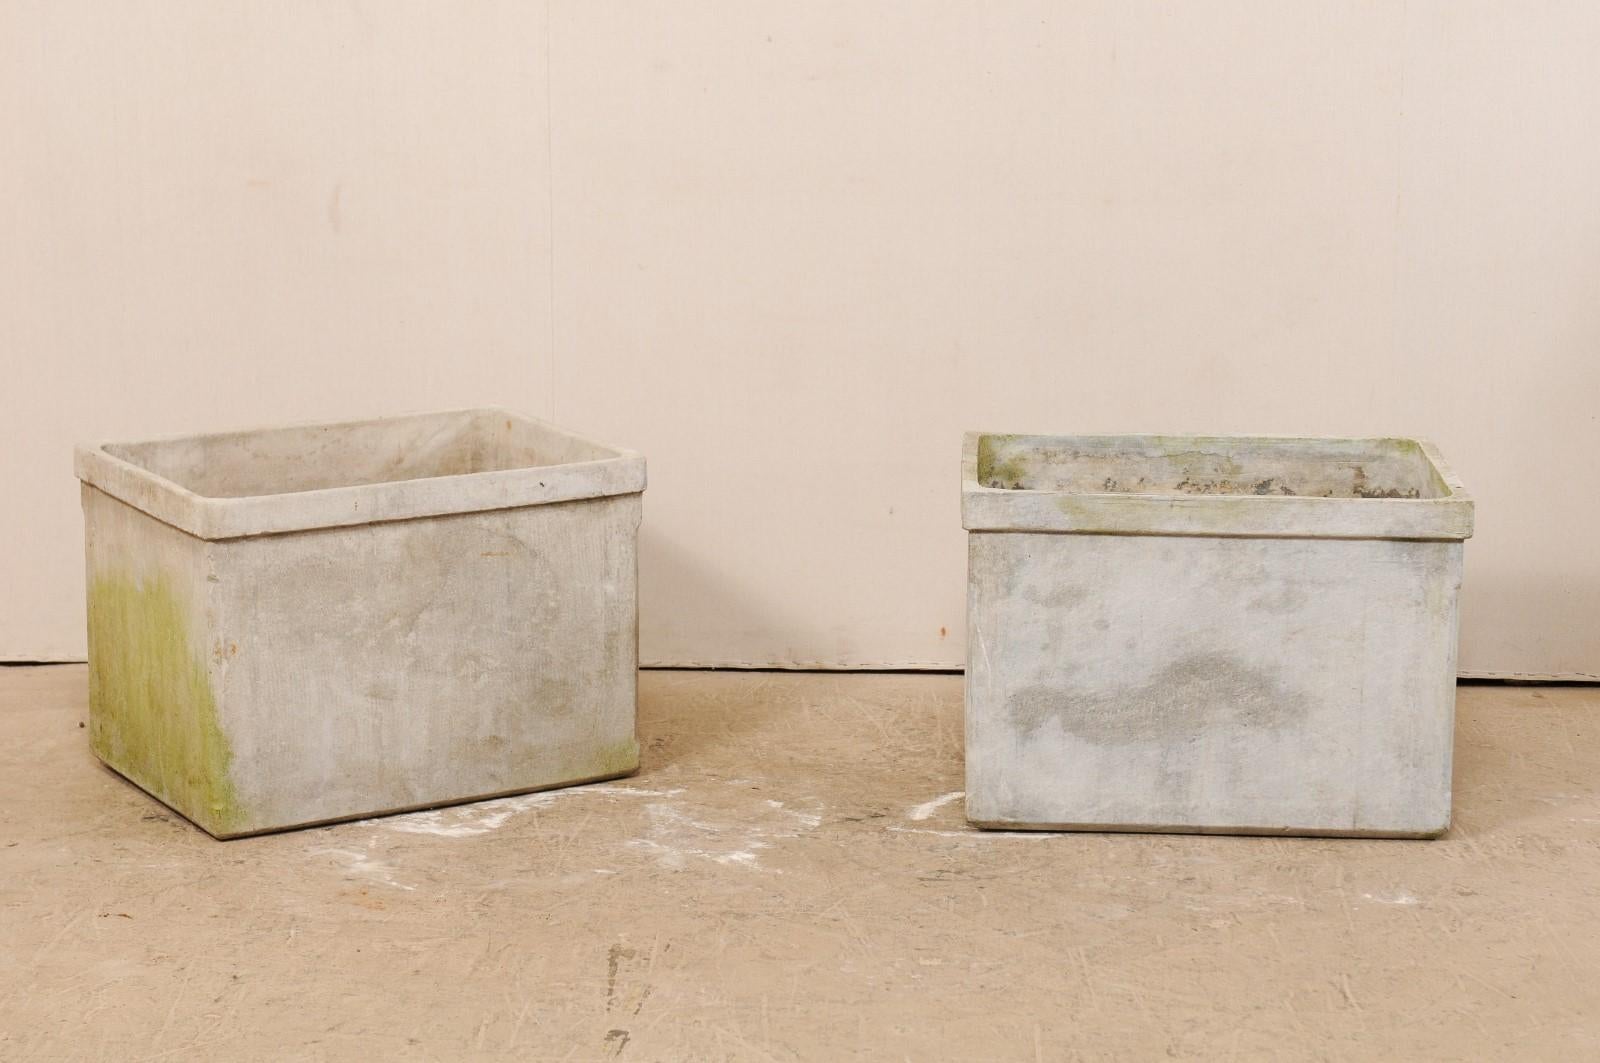 A pair of eternite planters attributed to Willy Guhl, mid-20th century. This pair of rectangular-shaped planters are a nearly perfect pair, only noticeable difference being that one has more squared rim corners while the other is more rounded. The